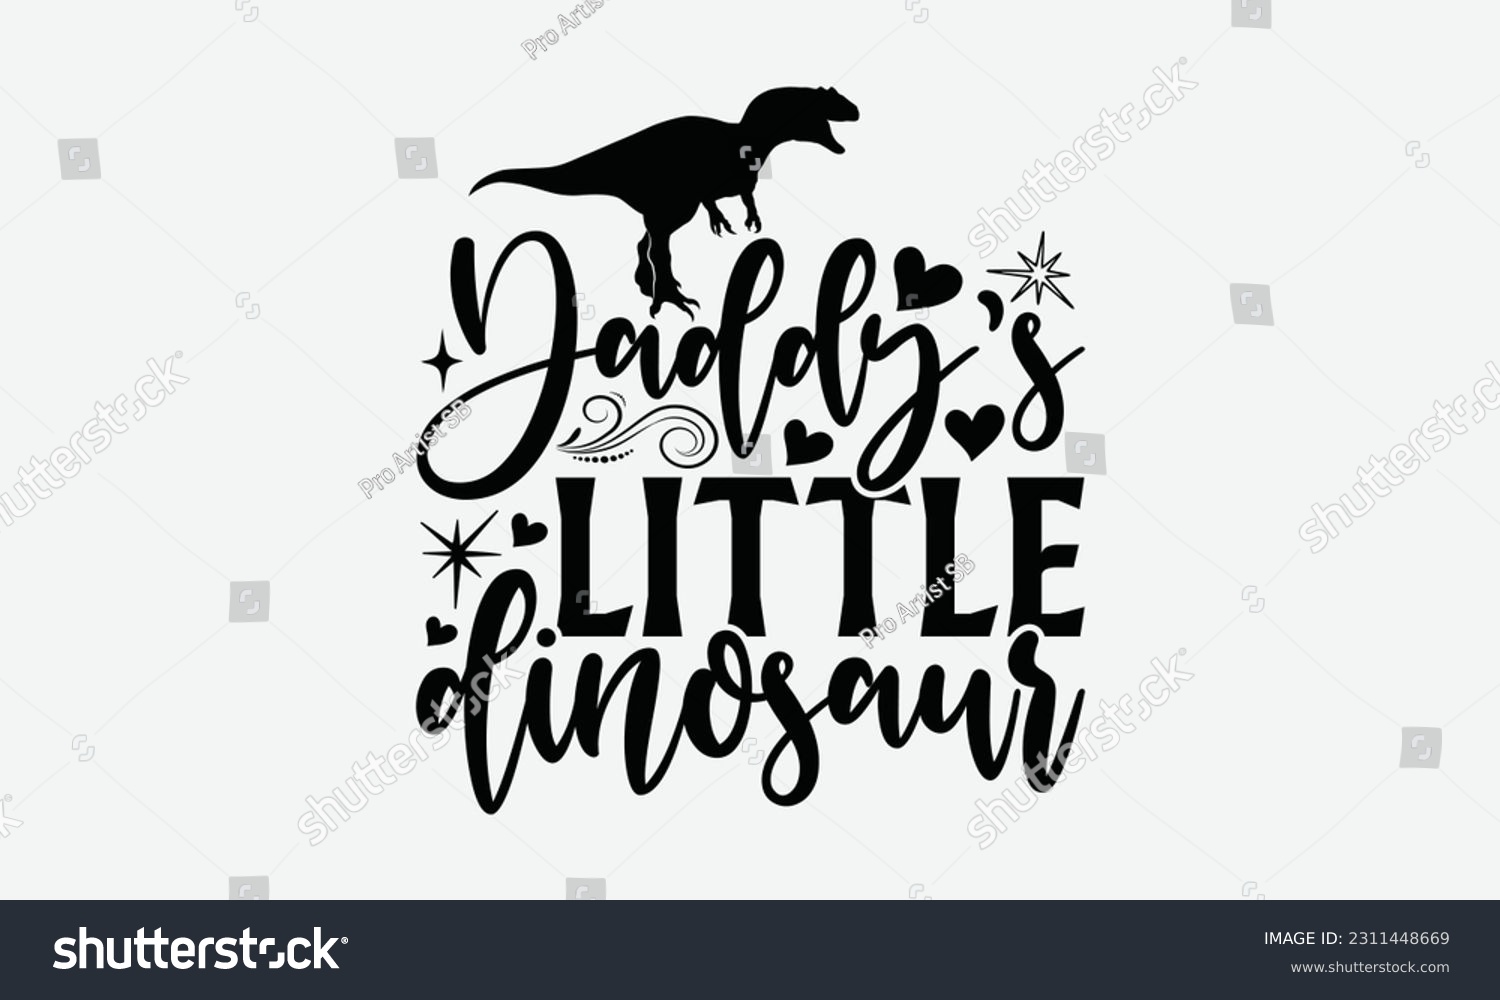 SVG of Daddy’s Little Dinosaur - Dinosaur SVG Design, Handmade Calligraphy Vector Illustration, Greeting Card Template With Typography Text. svg